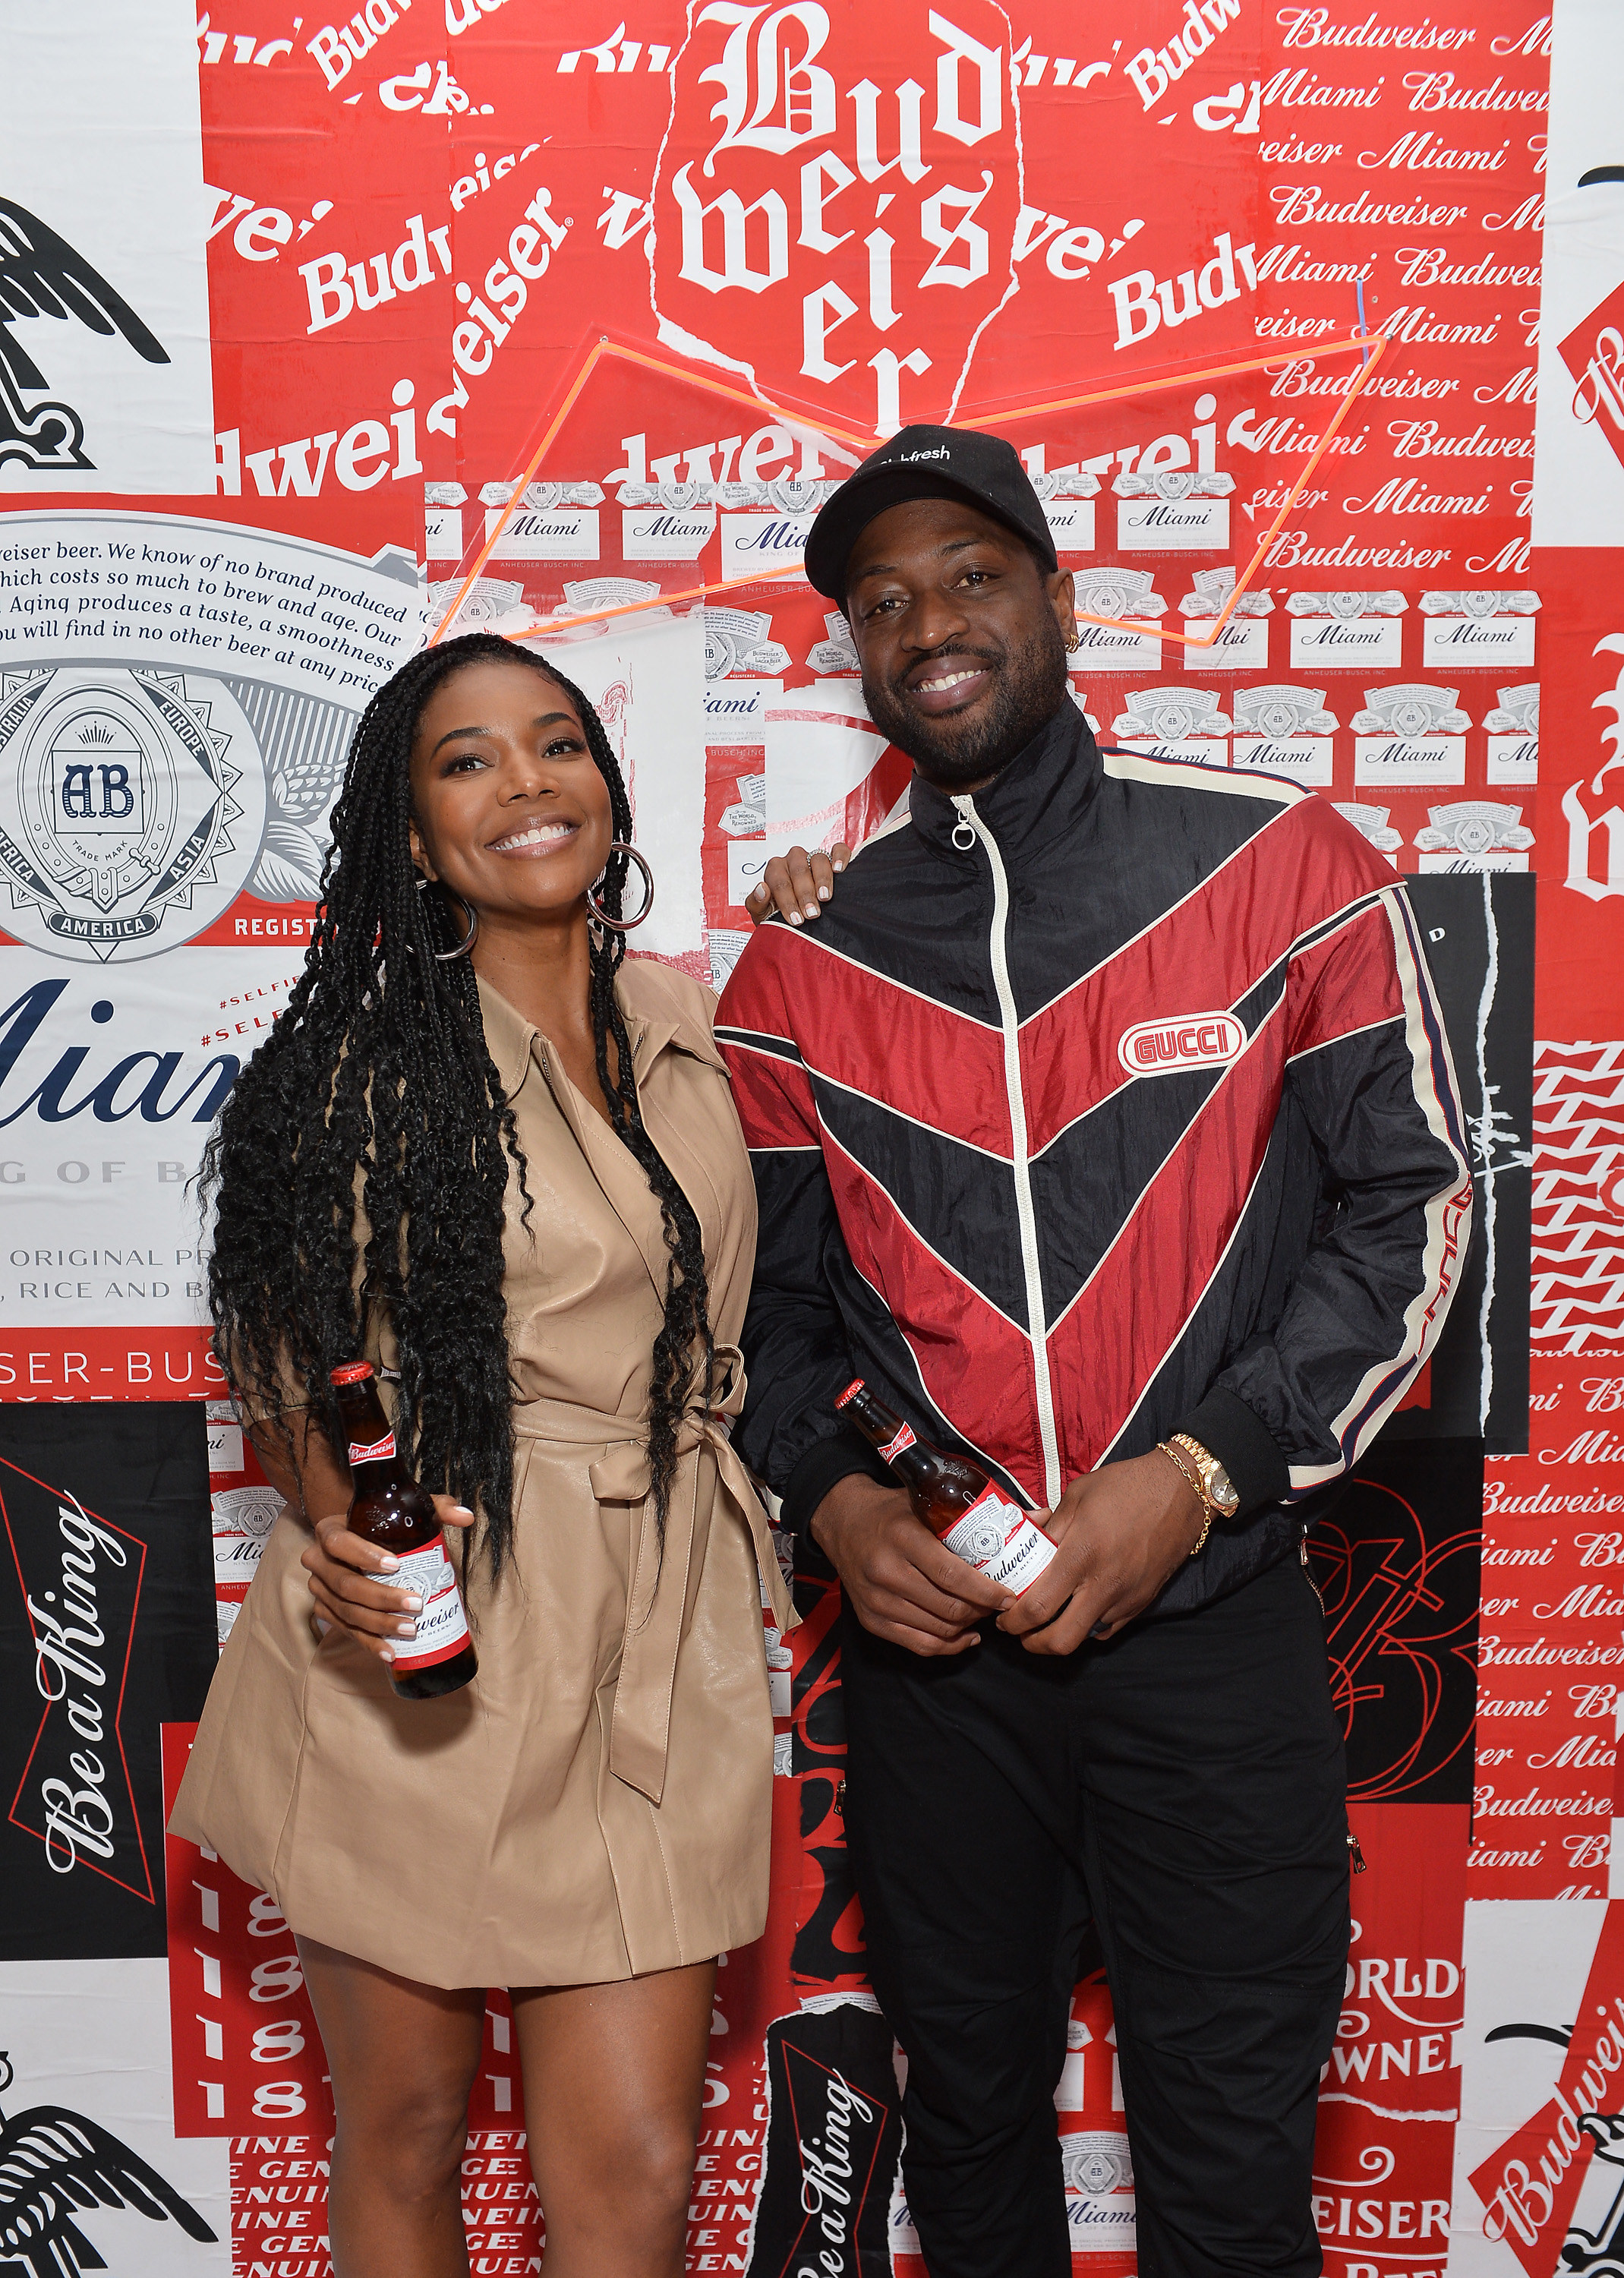 Gabrielle and Dwayne smiling for a photo as they both hold bottle of Bud Light beer at an event